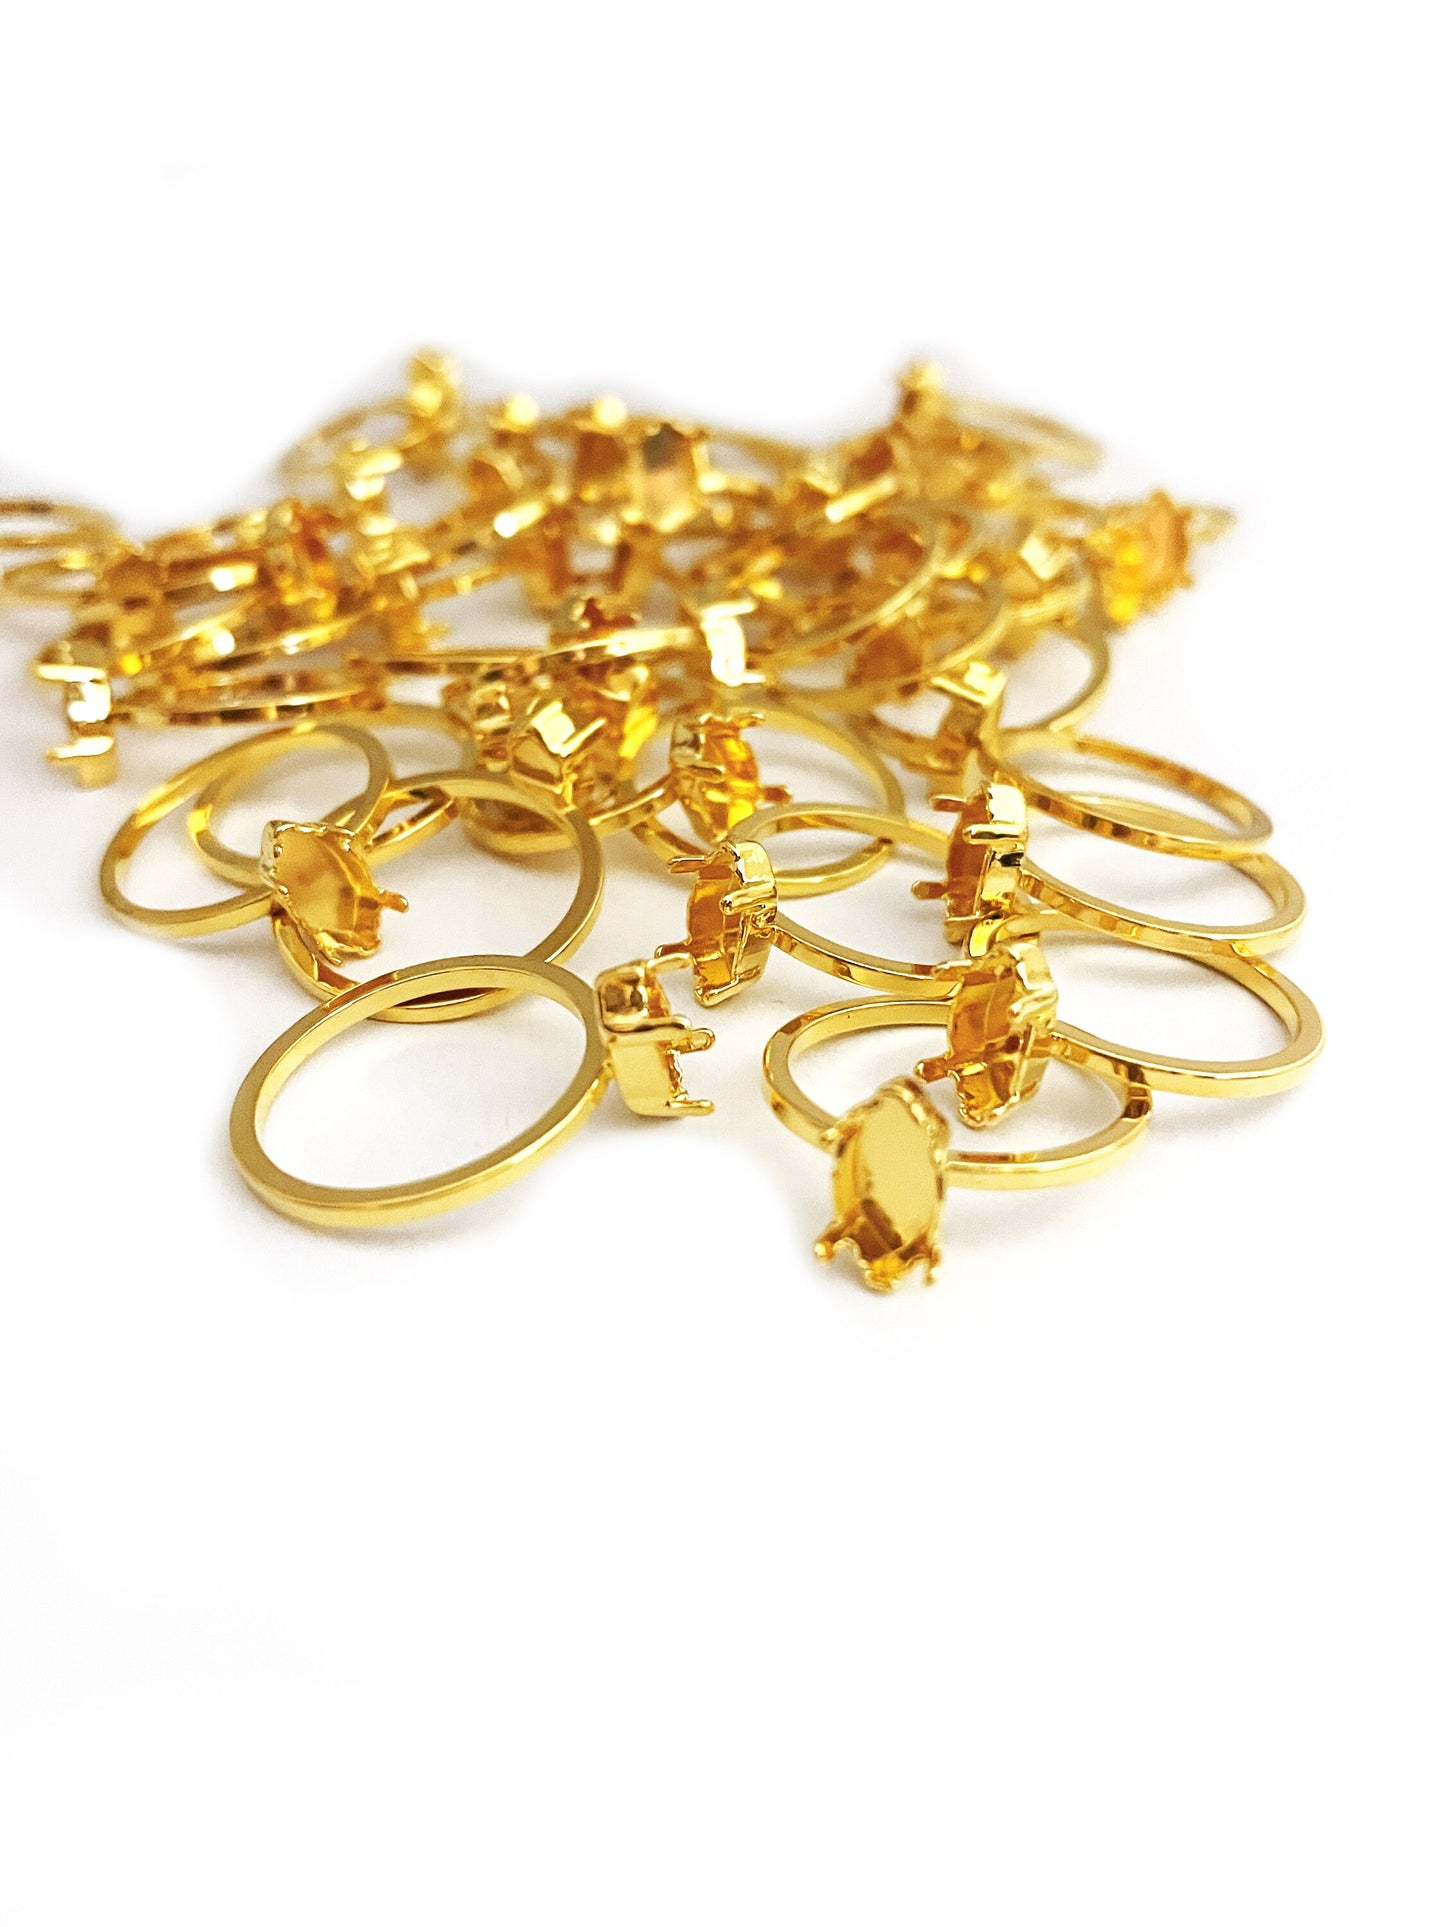 10 pieces Size 6 Gold Plated Ring Base with Navette Setting for 10x5mm